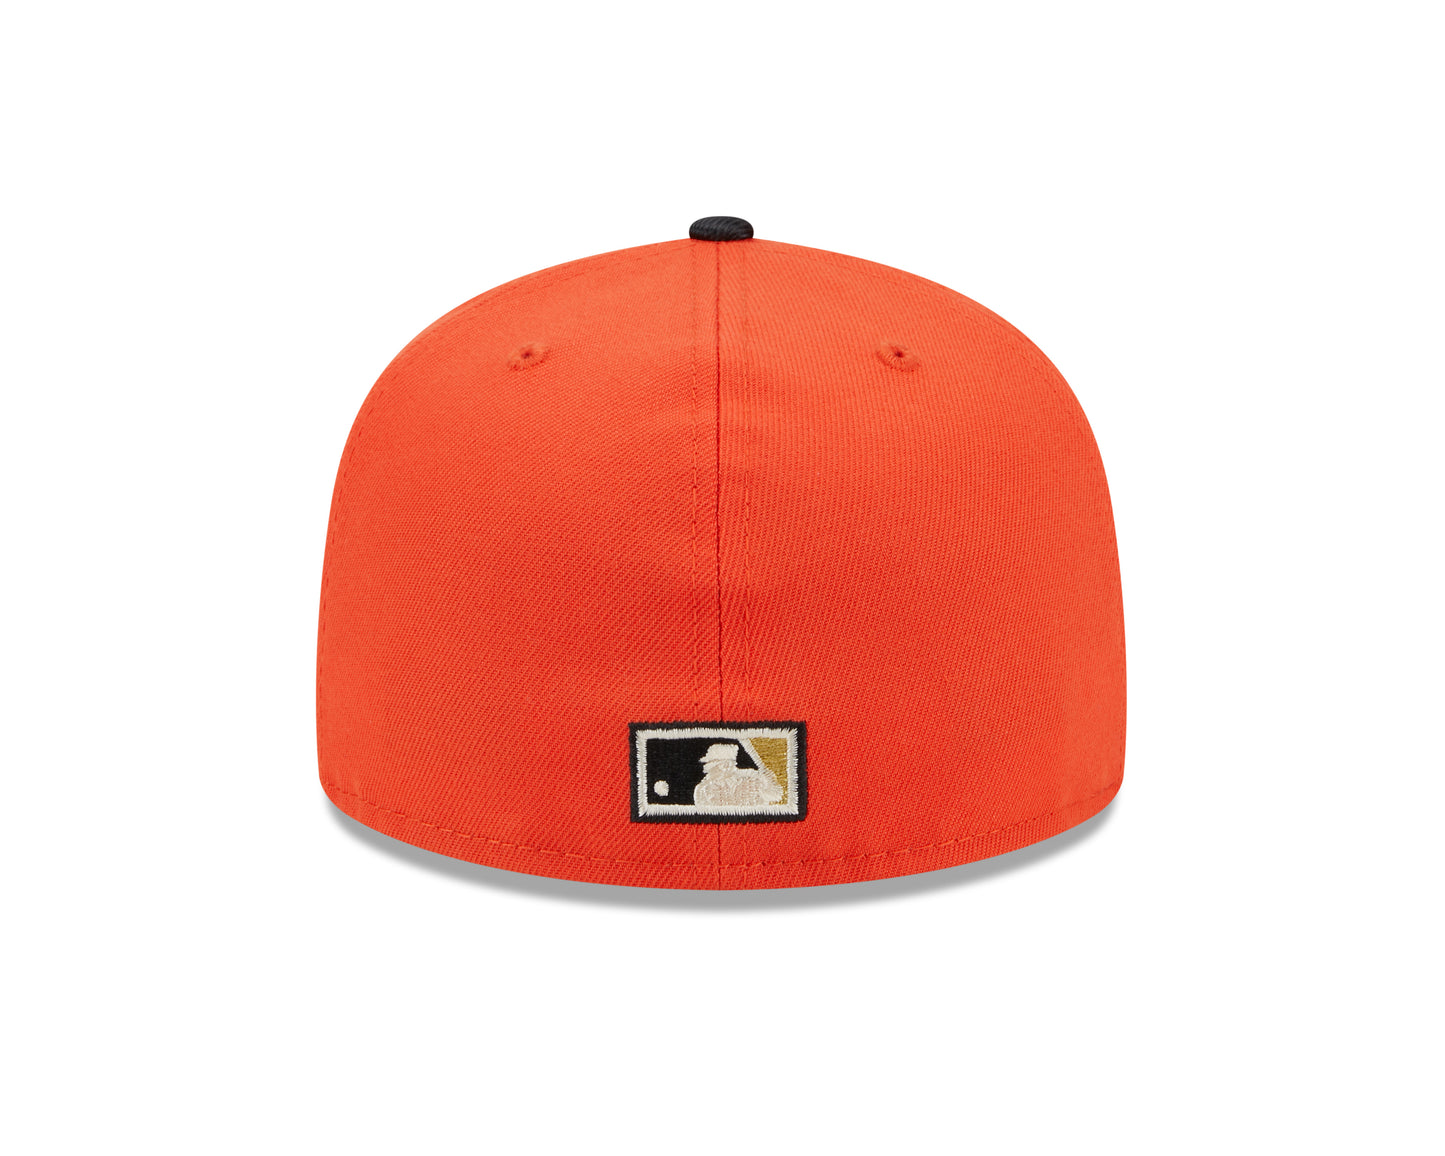 New Era - San Francisco Giants 59Fifty Fitted TEAM SHIMMER - OTC - Headz Up 